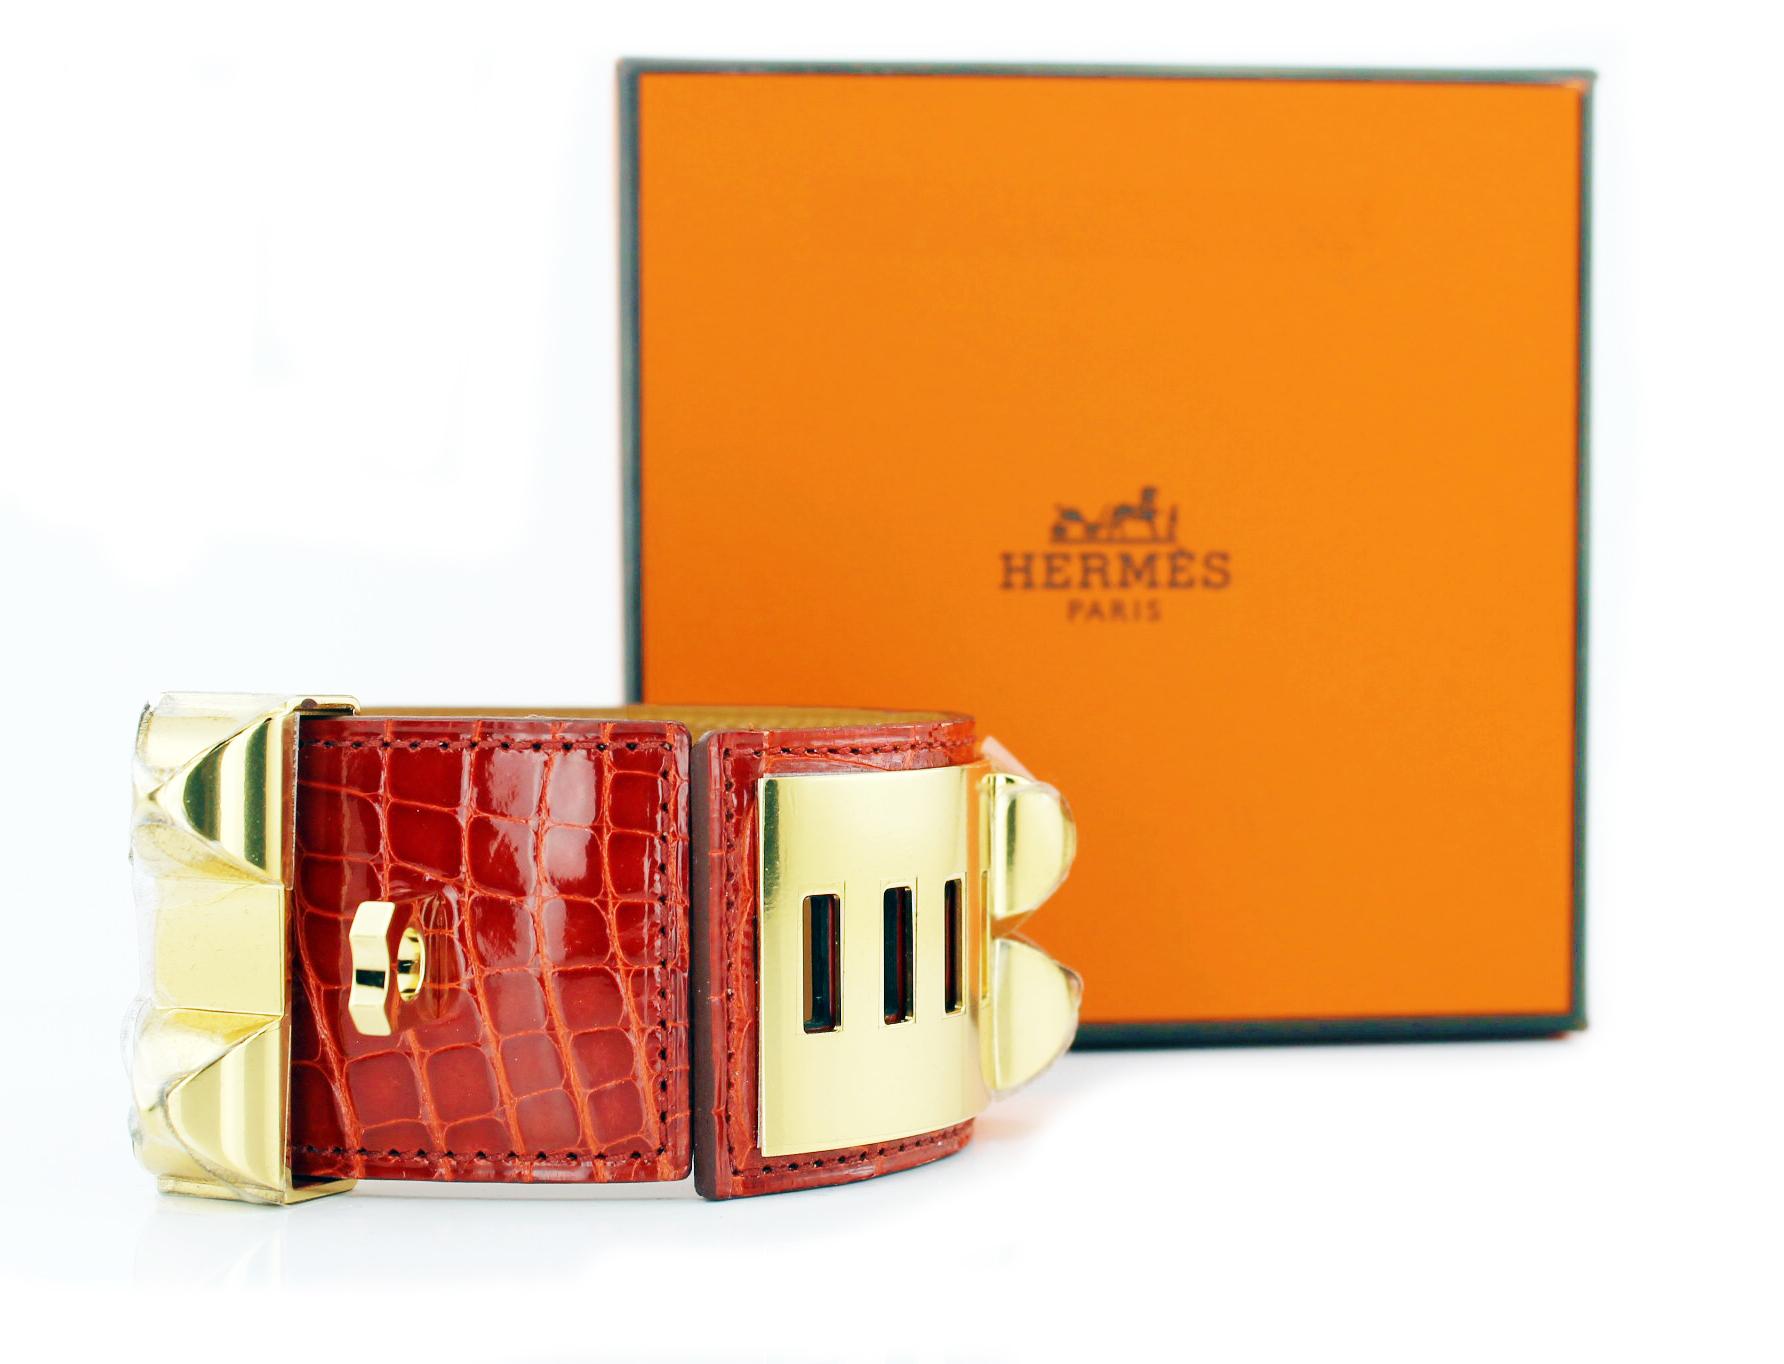 Hermes Collier De Chien Crocodile Cuff
Red crocodile cuff with gold plated pyramid studs and ring
New with stickers.
Original pouch and box
Size: Small
RRP £1,700